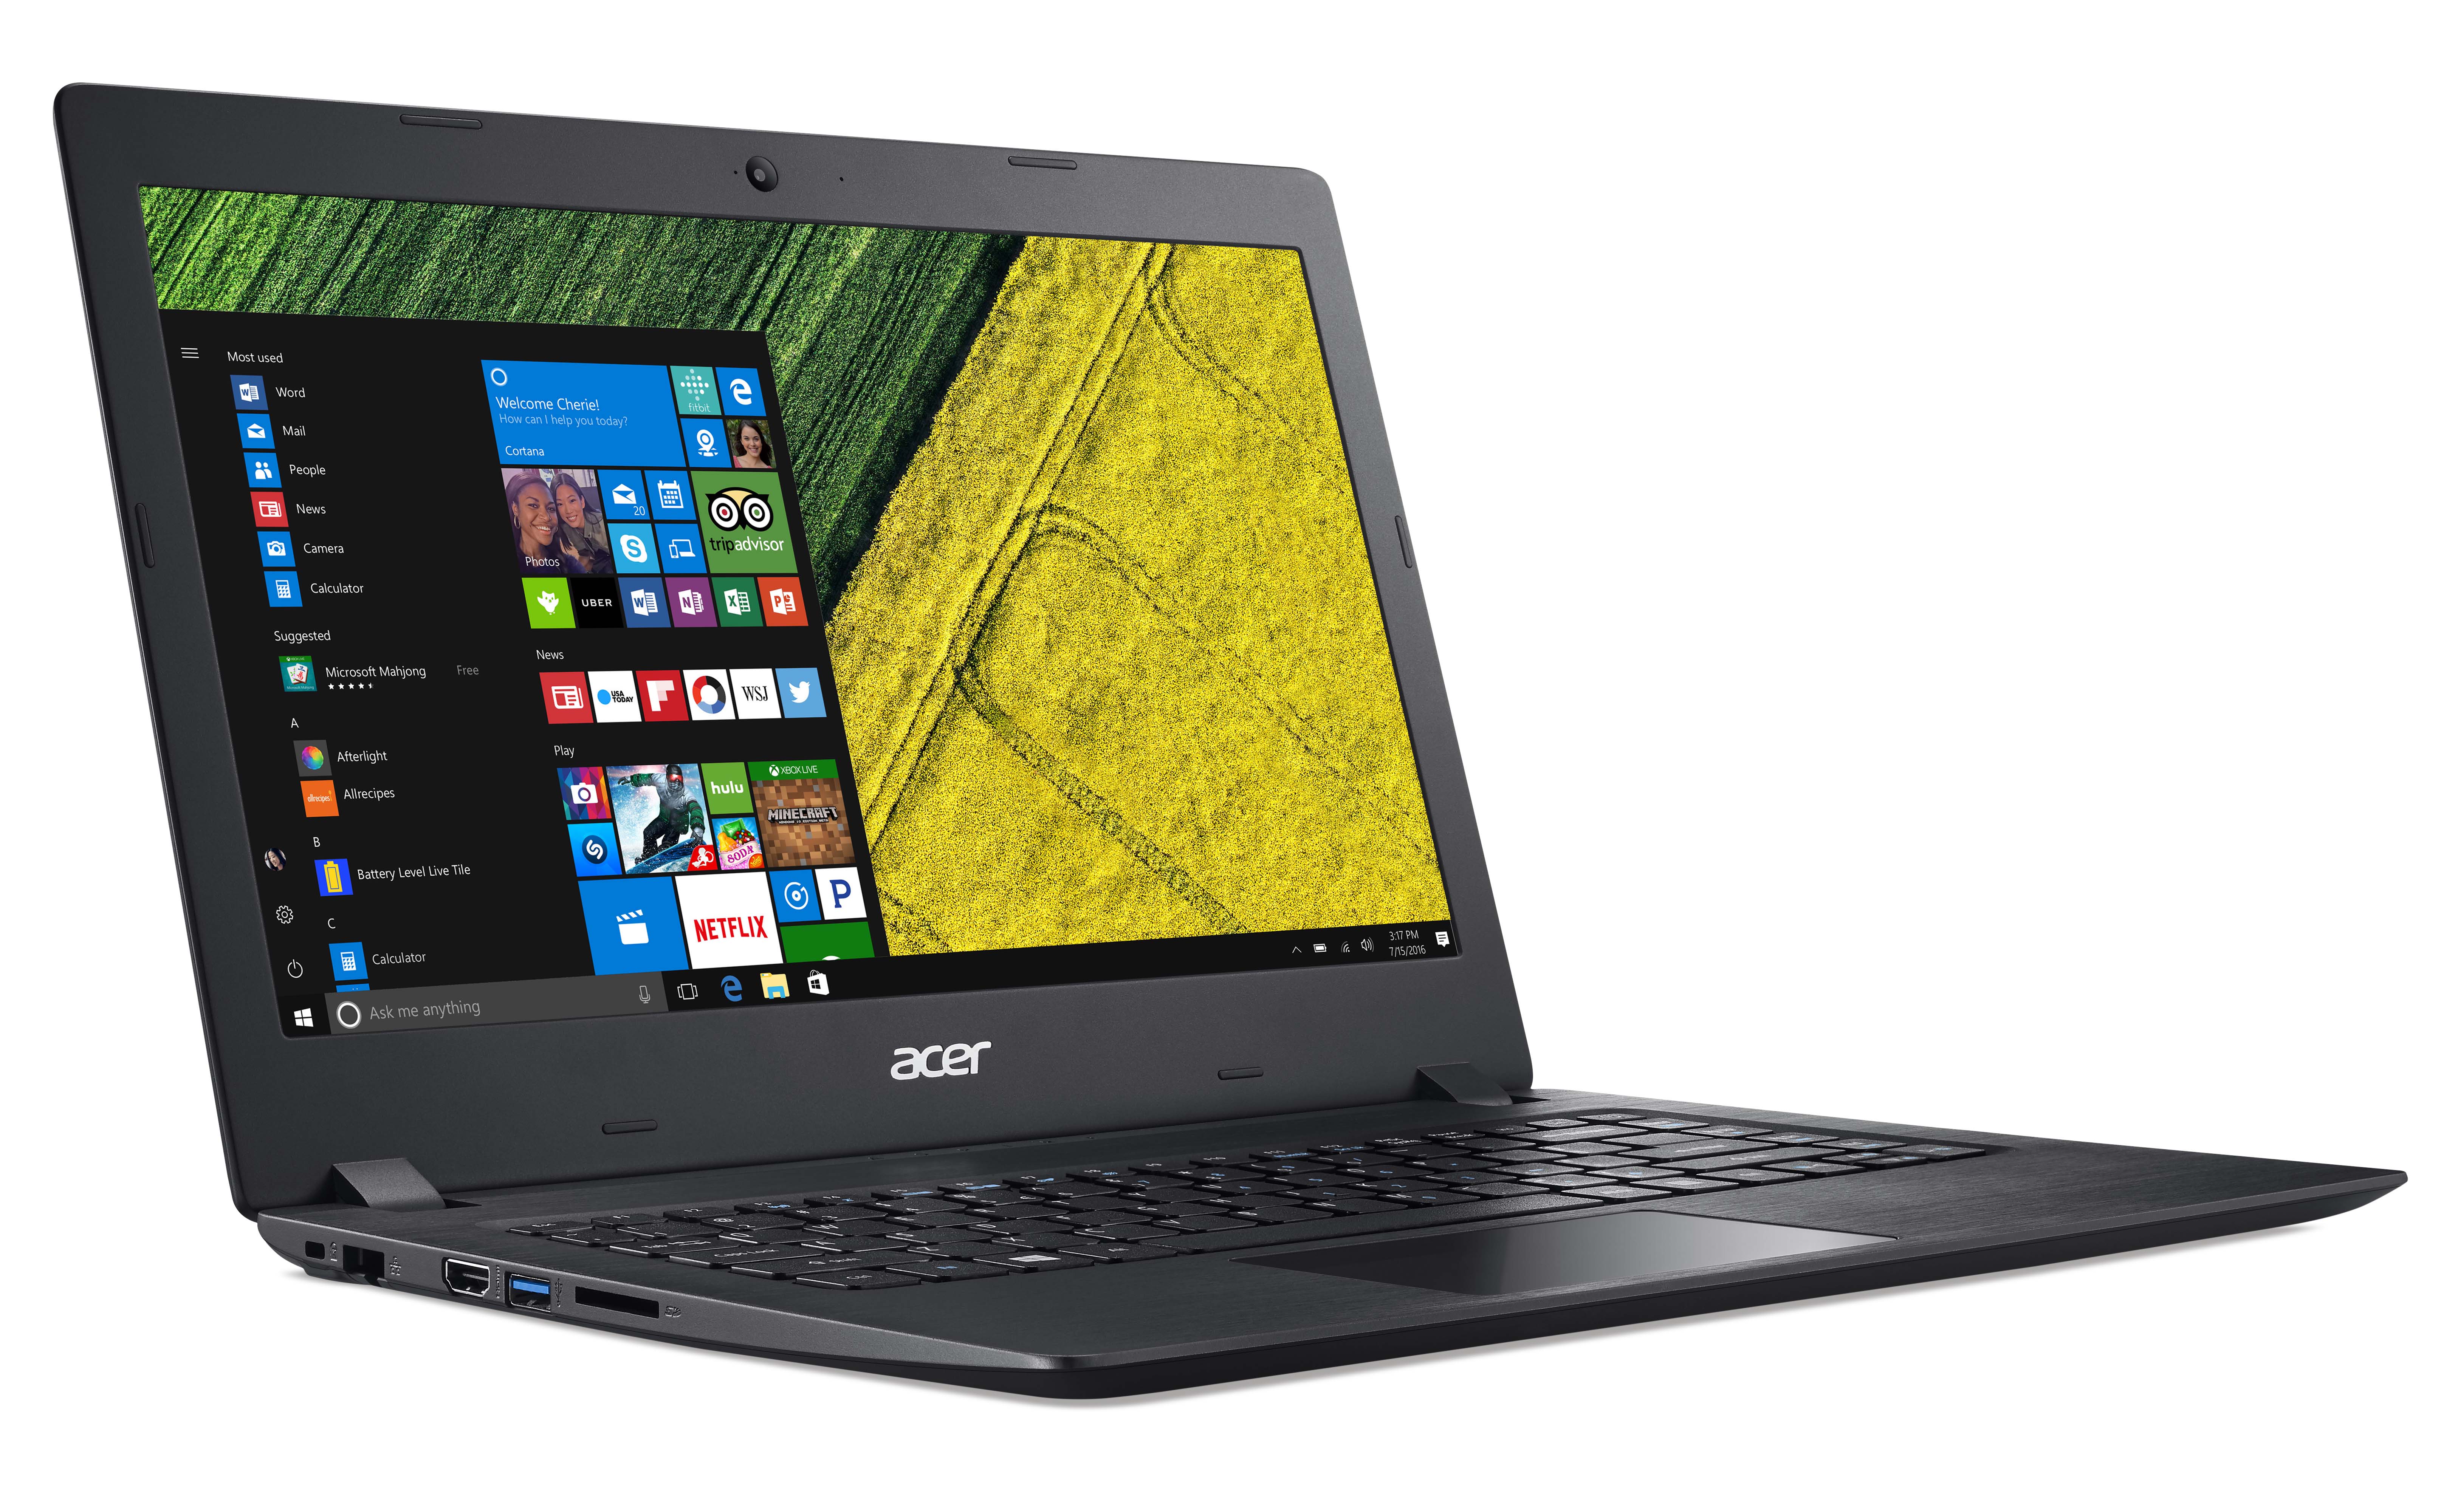 The Acer Aspire 1 with Windows 10